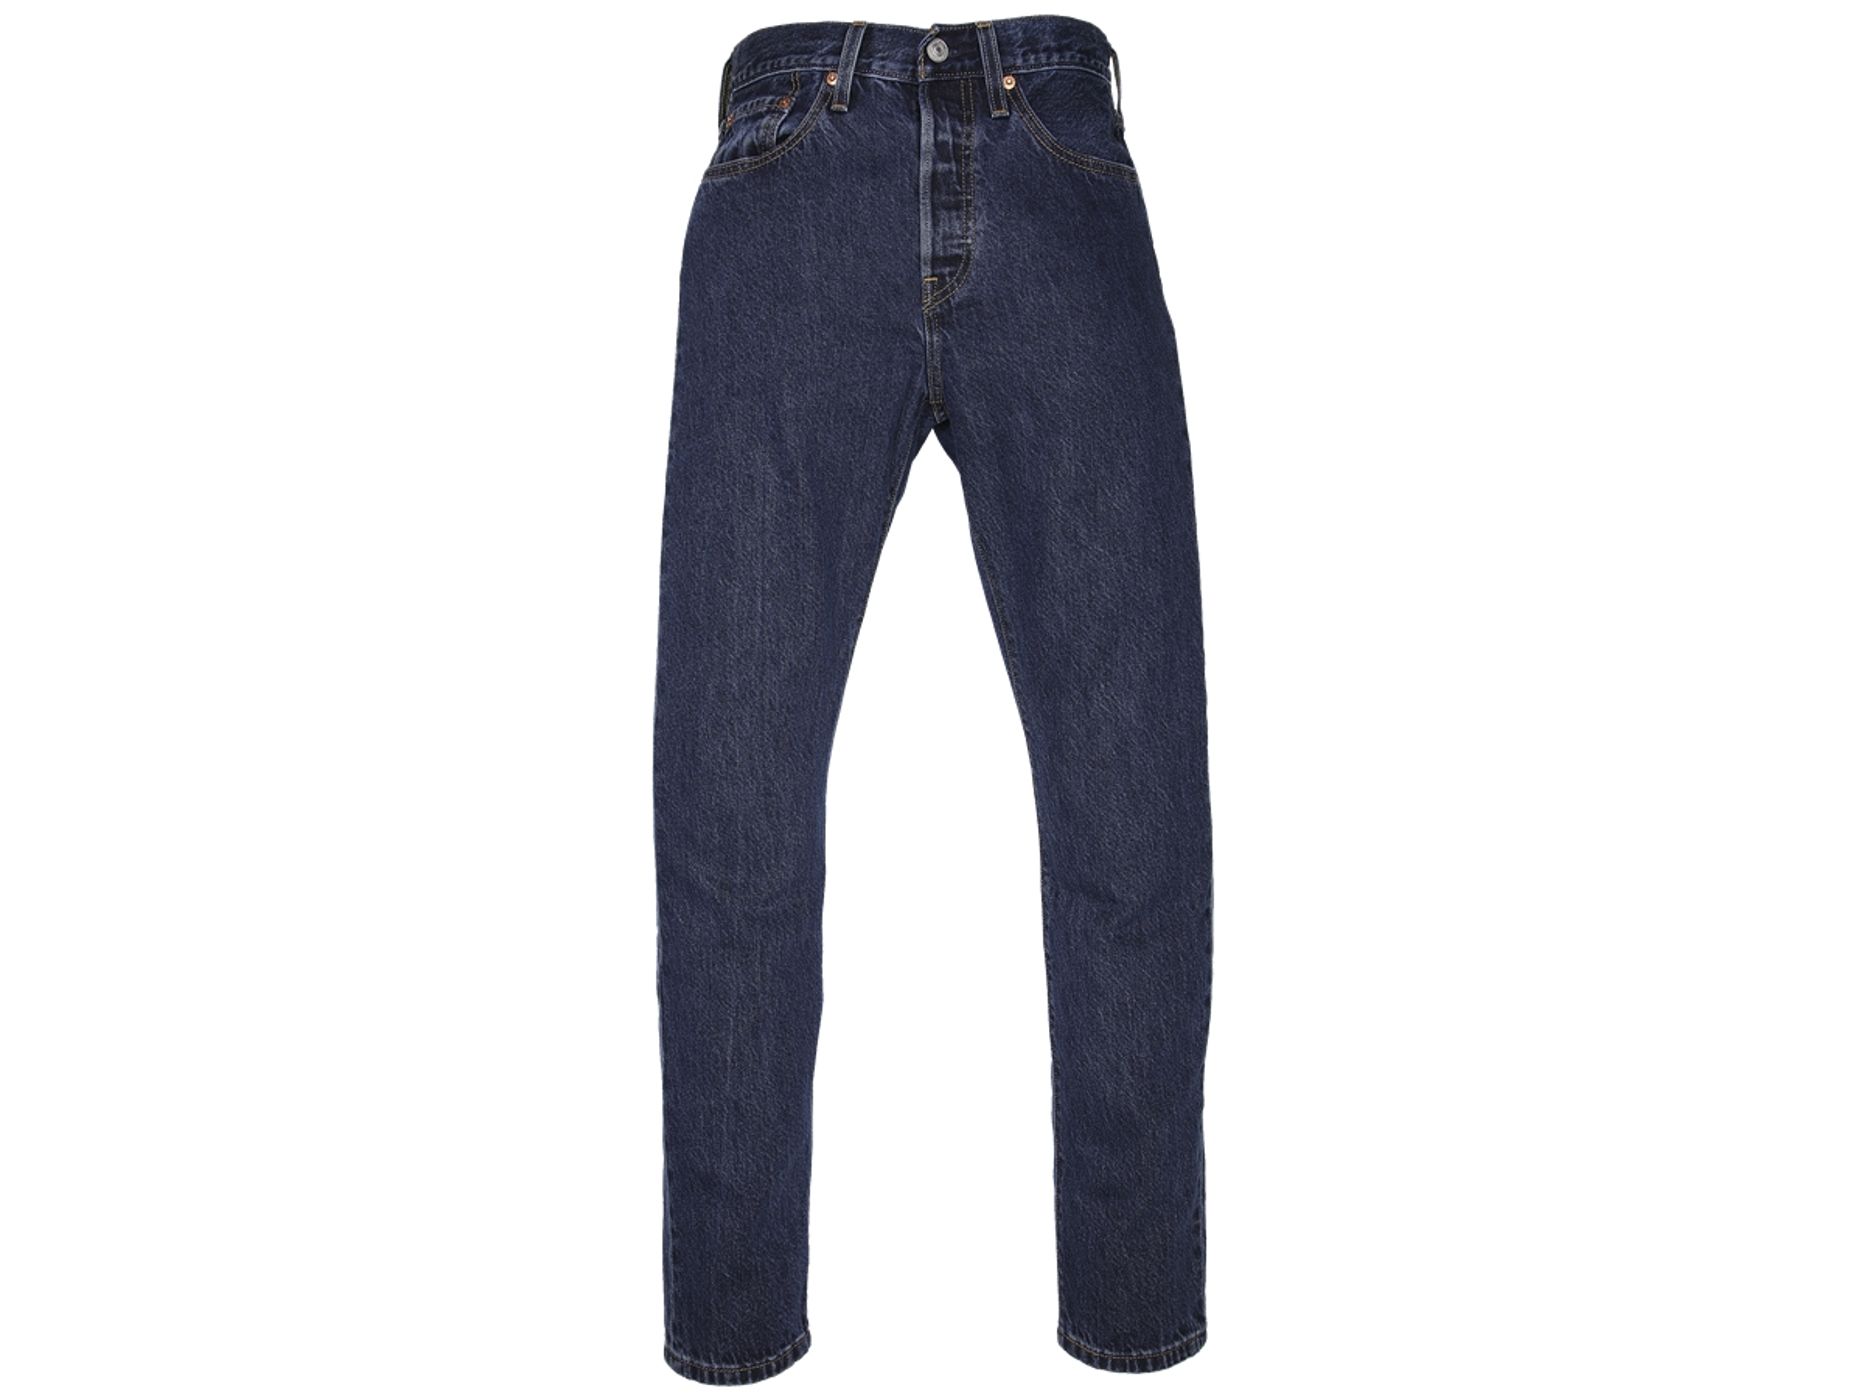 Ribcage Straight Ankle Jeans - Levi's